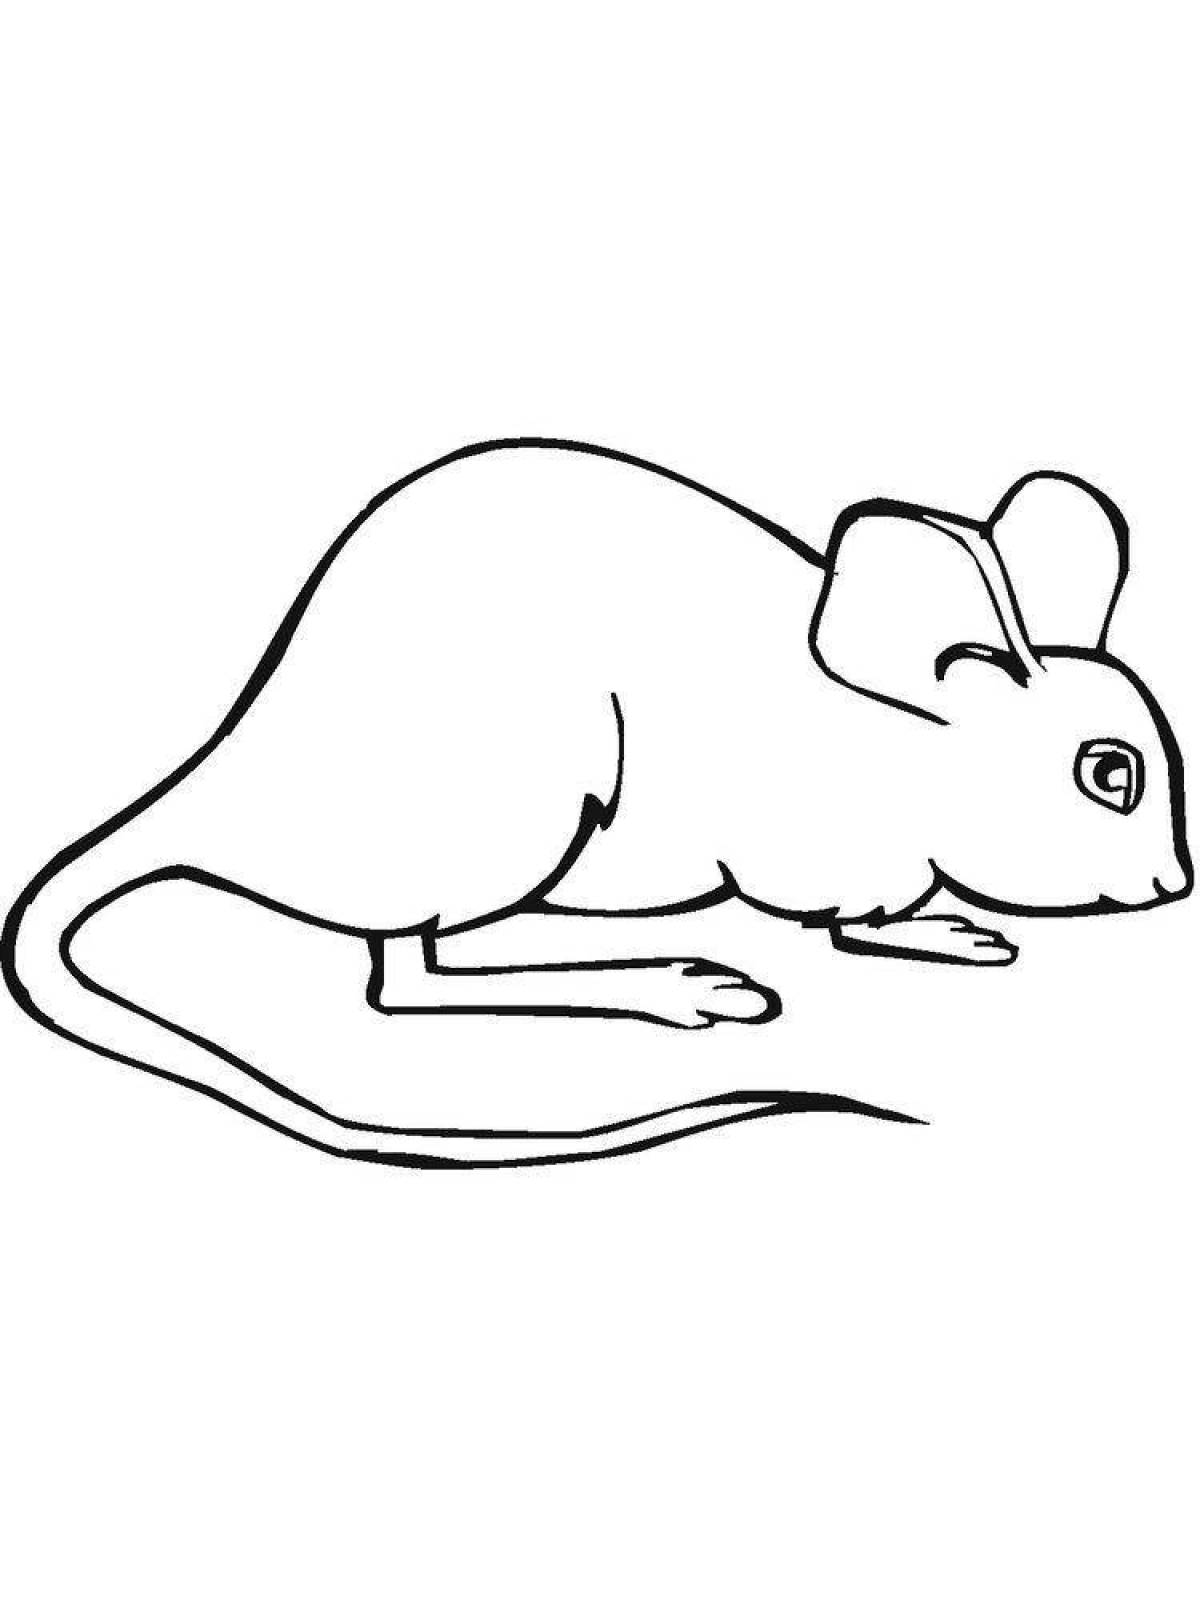 Coloring cute mouse for kids